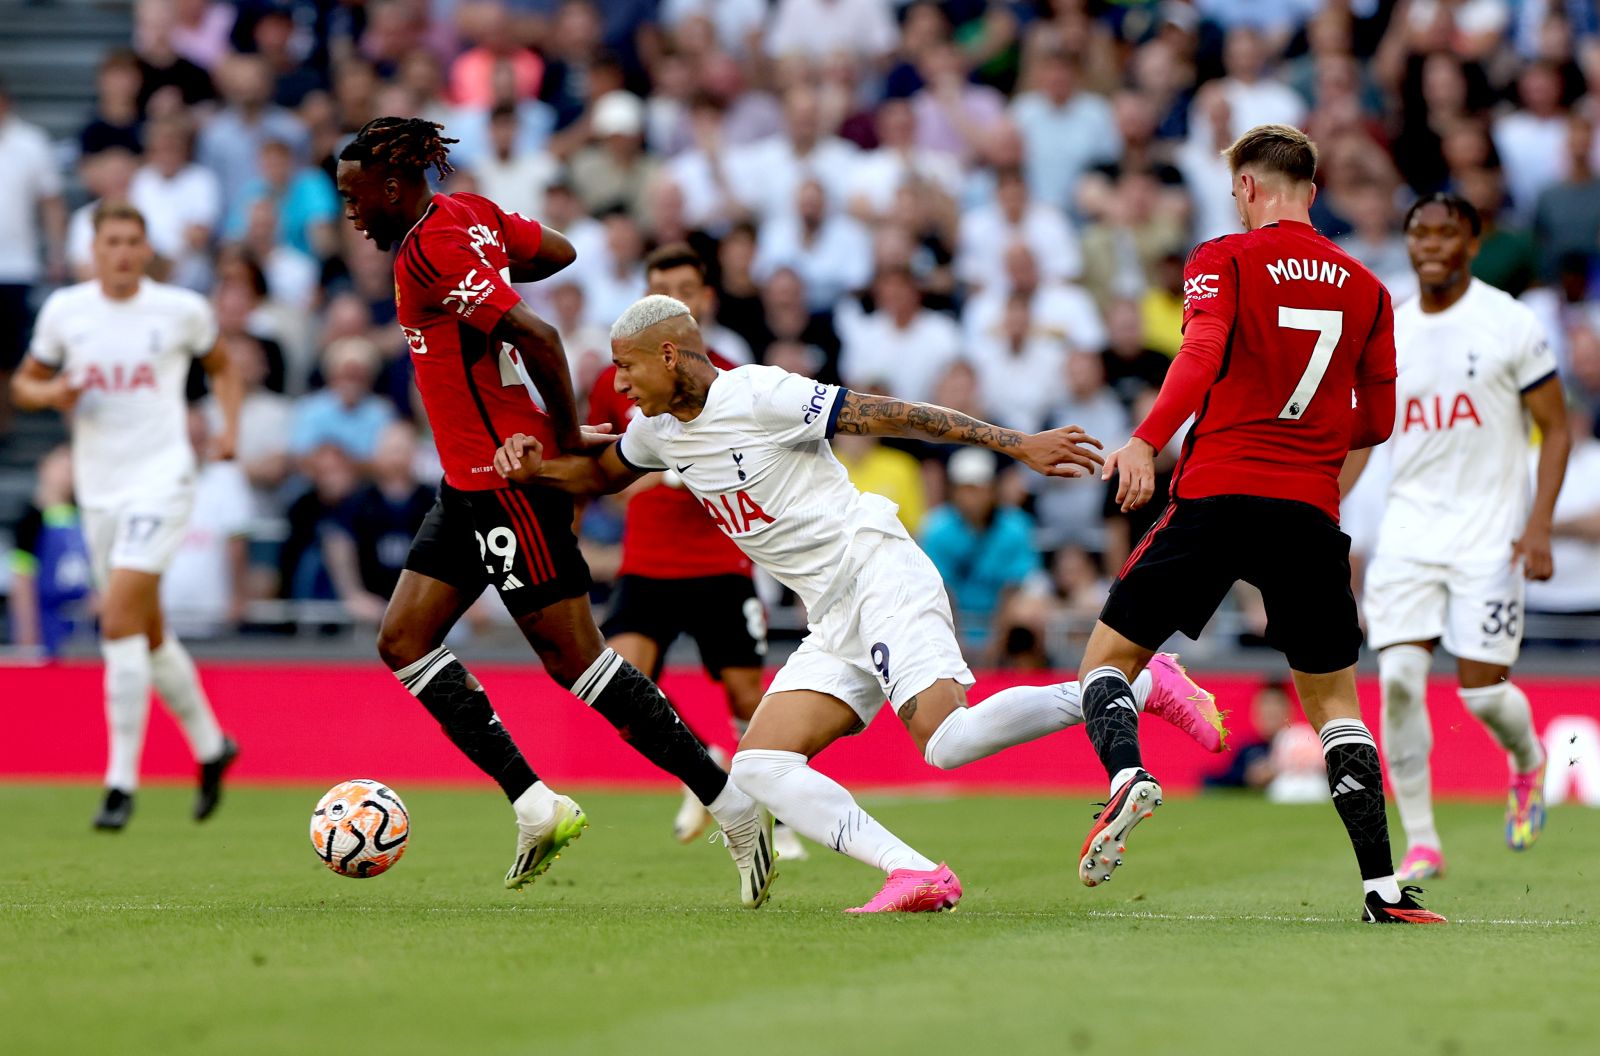 epa10807729 Richarlison (C) of Tottenham in action against Mason Mount (R) and Aaron Wan-Bissaka of Manchester United in action during the English Premier League soccer matchh between Tottenham Hotspur and Manchester United, in London, Britain, 19 August 2023.  EPA/ANDY RAIN EDITORIAL USE ONLY. No use with unauthorized audio, video, data, fixture lists, club/league logos or 'live' services. Online in-match use limited to 120 images, no video emulation. No use in betting, games or single club/league/player publications.